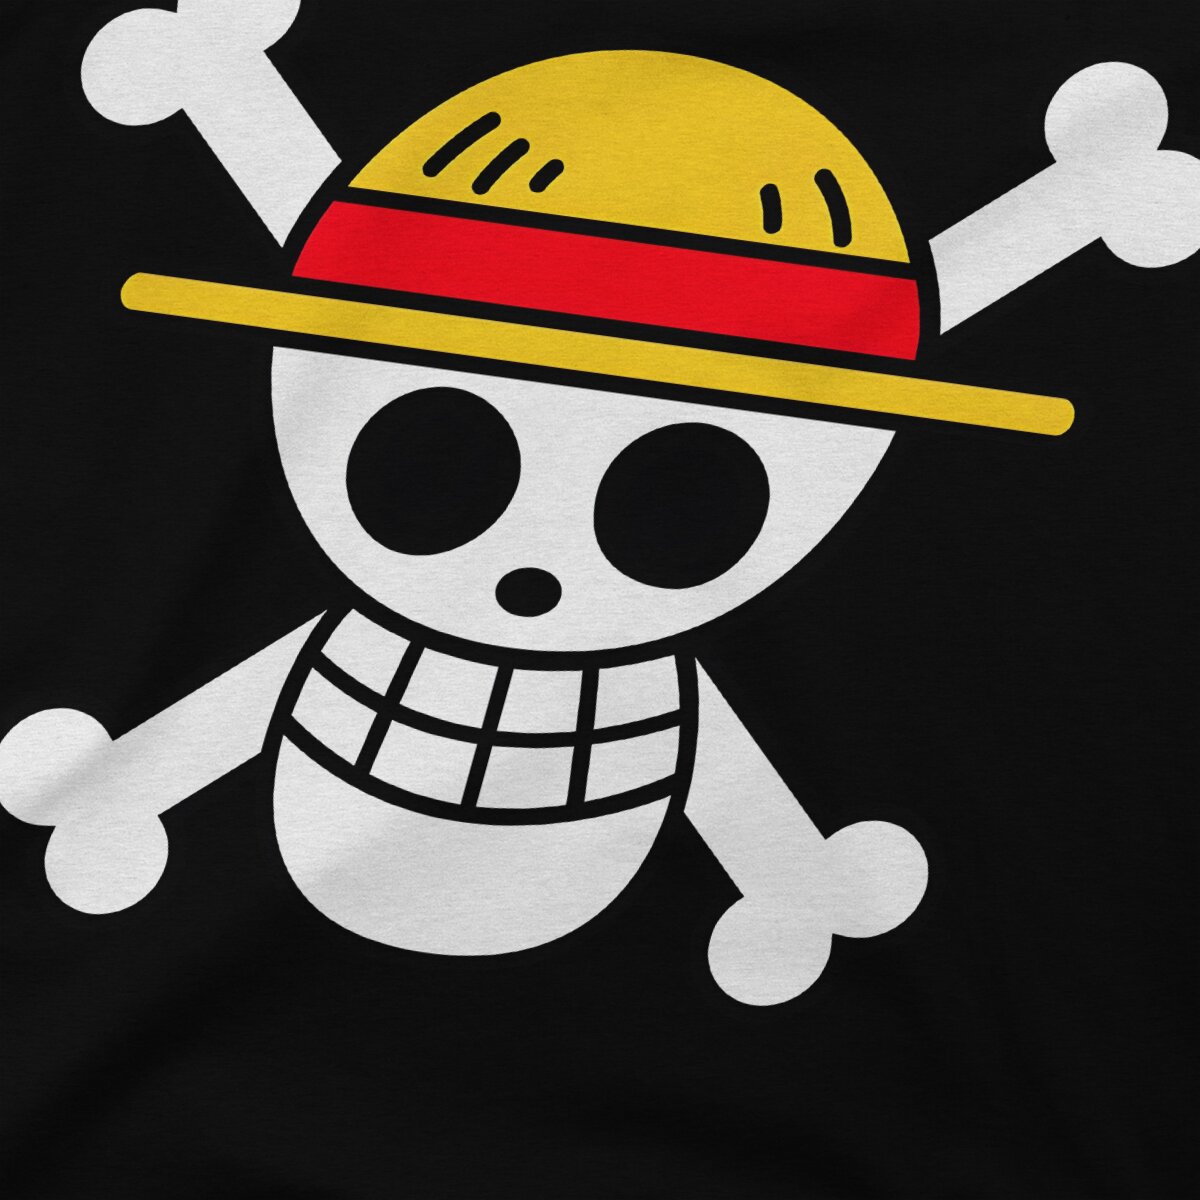 One Piece Skull Pirate Flag Man s TShirt O Neck Tops Polyester T Shirt Funny Birthday 3 - One Piece Plush